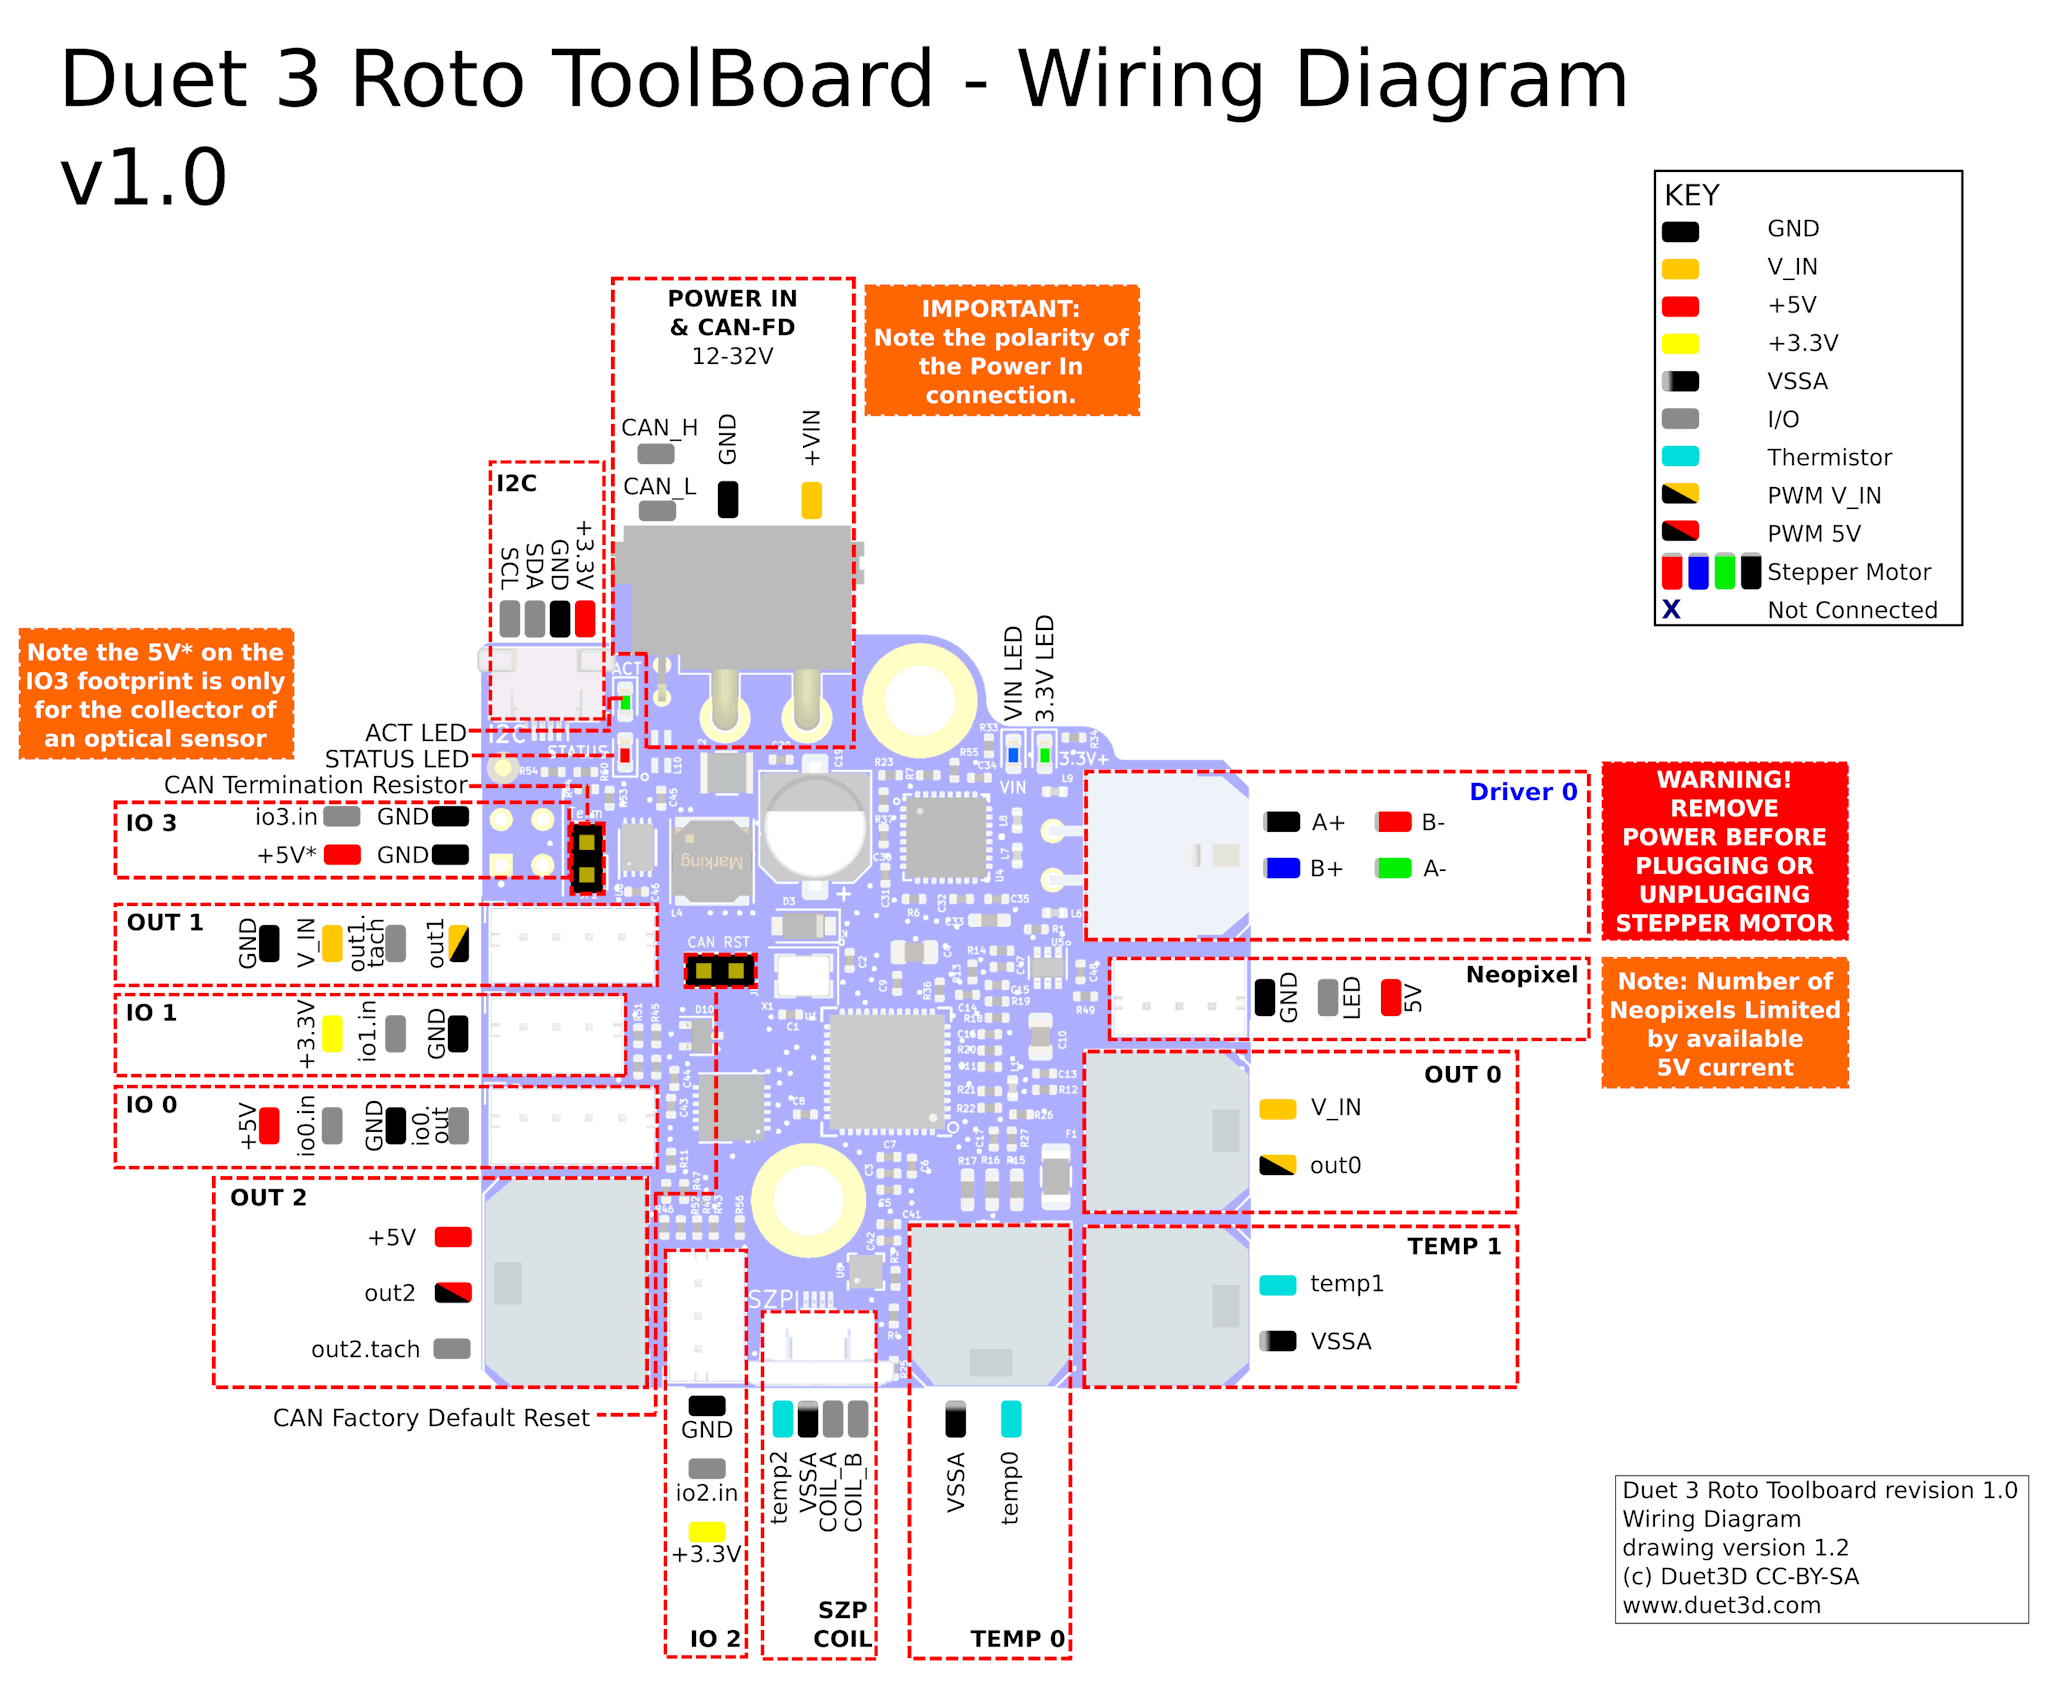 diagram showing the pinout for each of the headers on the Duet 3 Roto Toolboard v1.0